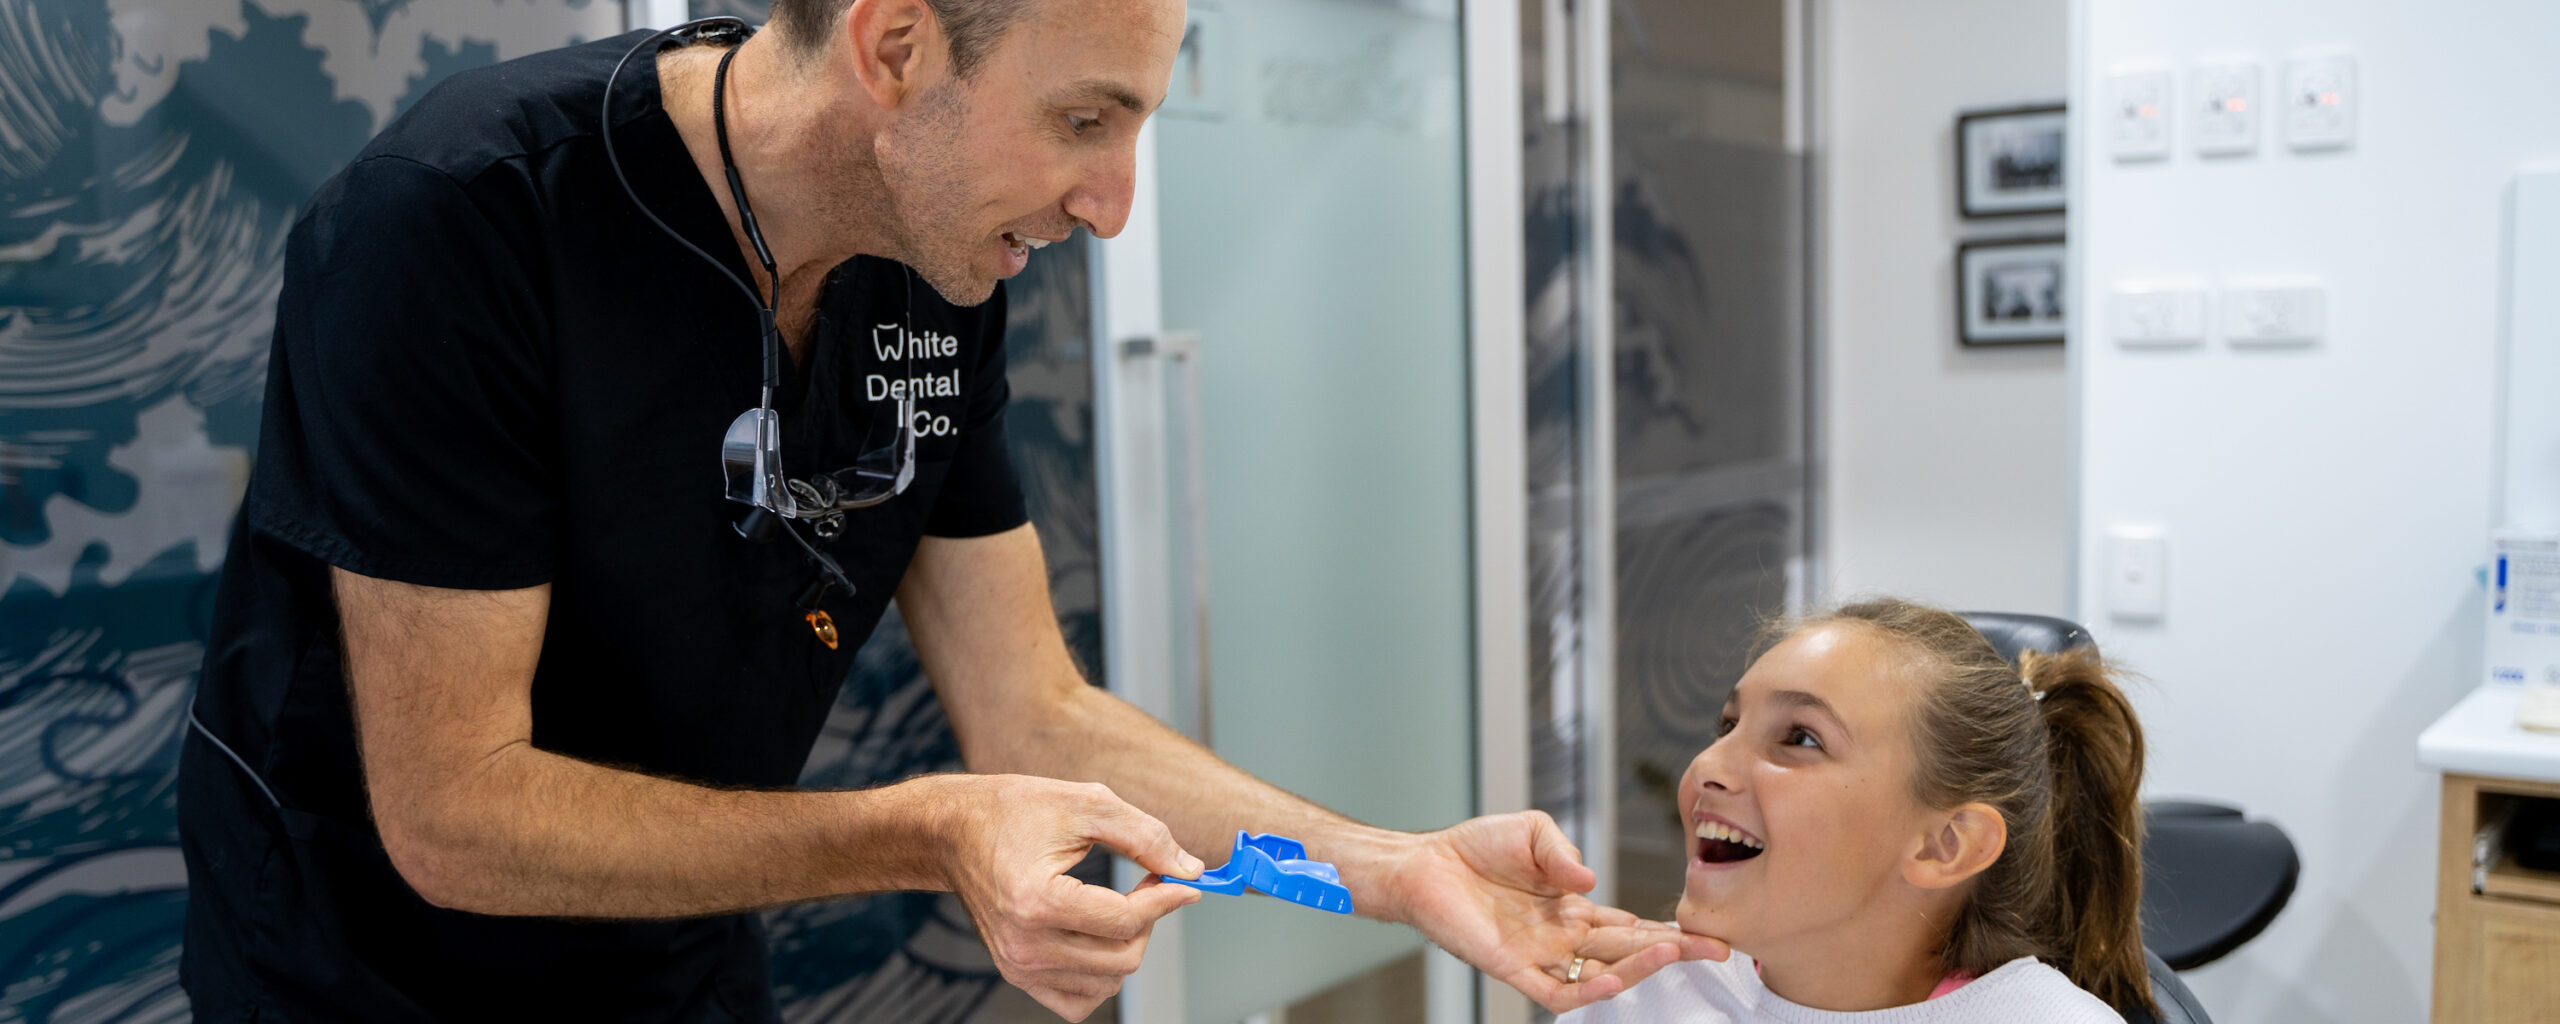 Dr Nick prepares a young patient for an impression for a mouthguard. He is holding an impression tray, ready to try it in to check it’s the correct size.